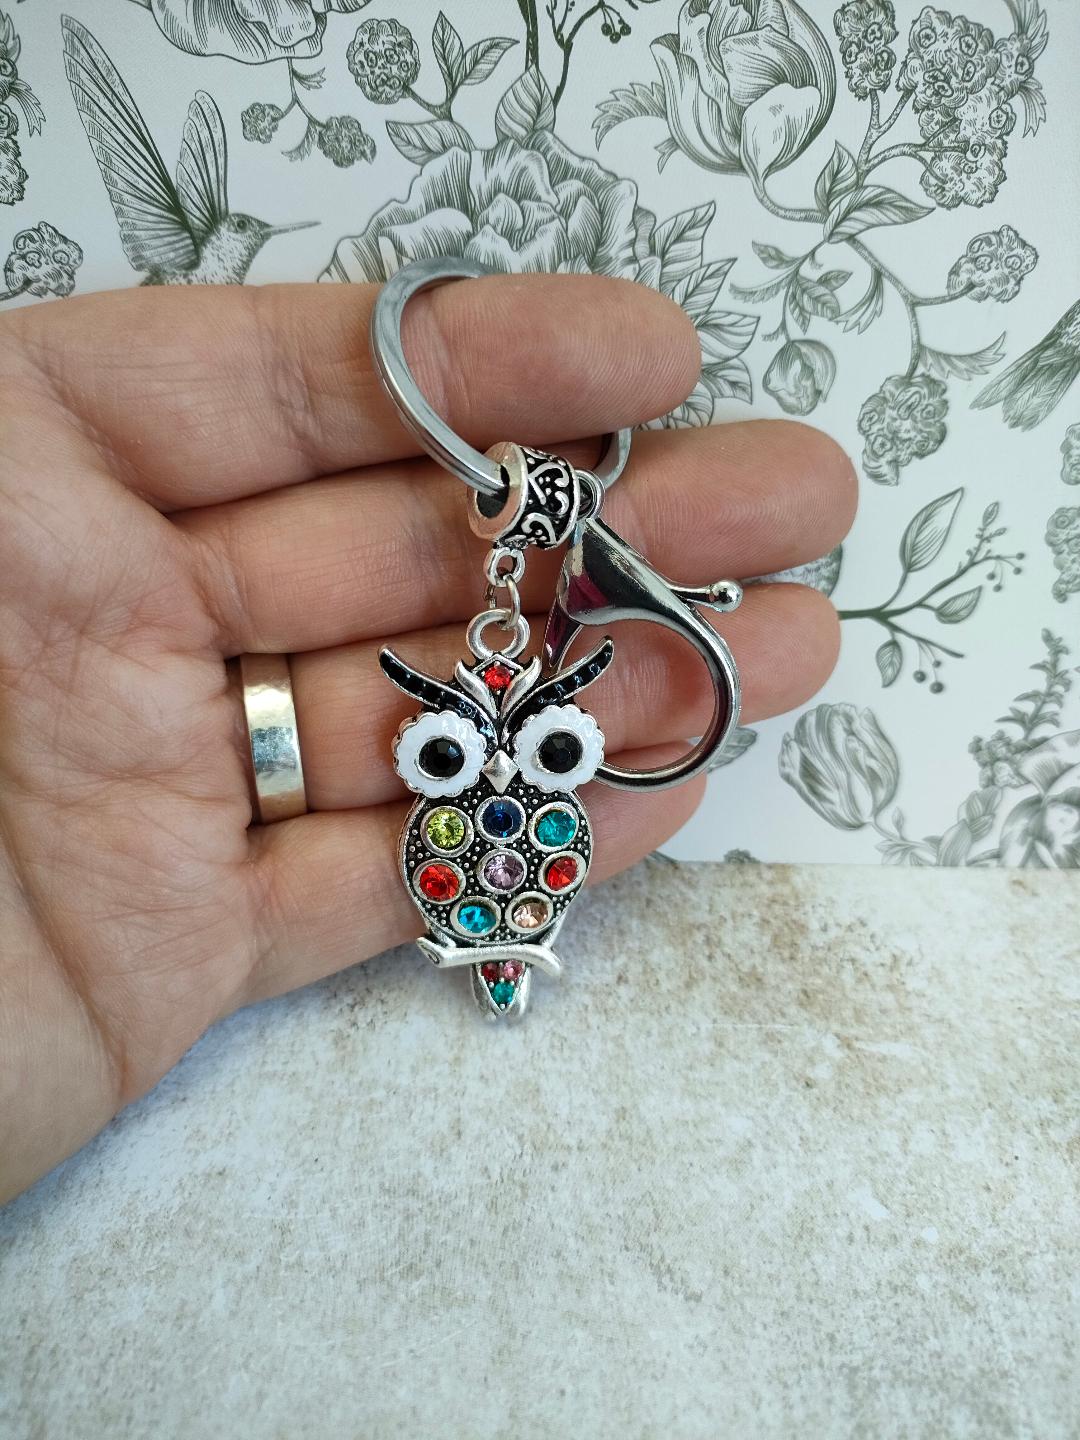 Wise Olw Keychains, Tibetan Style Owl with Rhinestones, Bird Themed Bag accessories and Keyrings